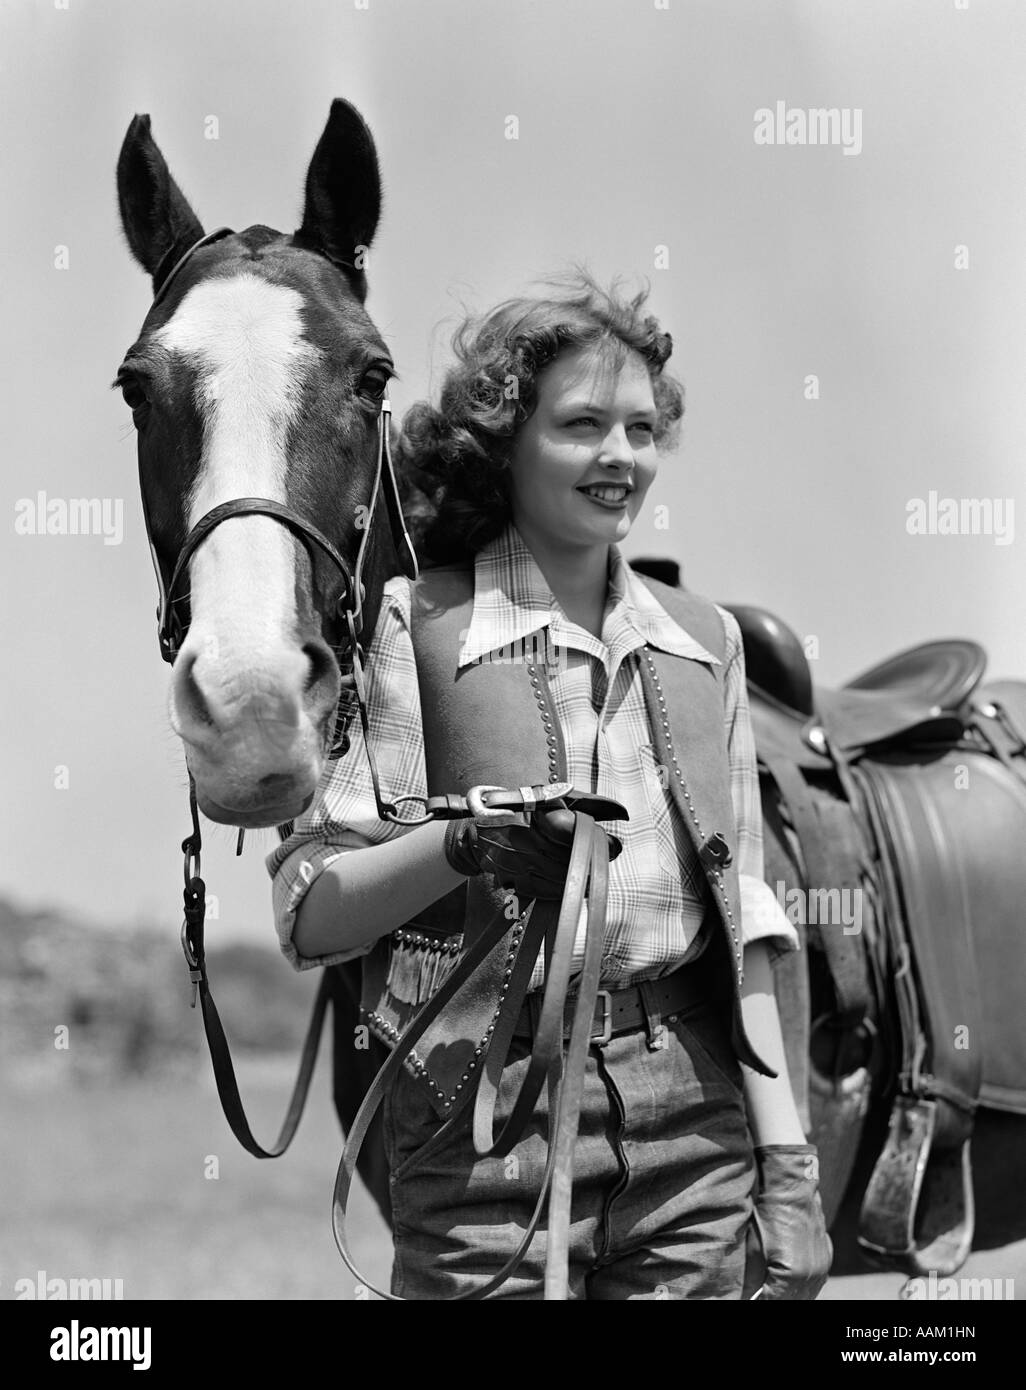 1940s SMILING TEENAGE GIRL IN STUDDED FRINGED WESTERN VEST WEARING LEATHER GLOVES HOLDING REINS OF HORSE Stock Photo